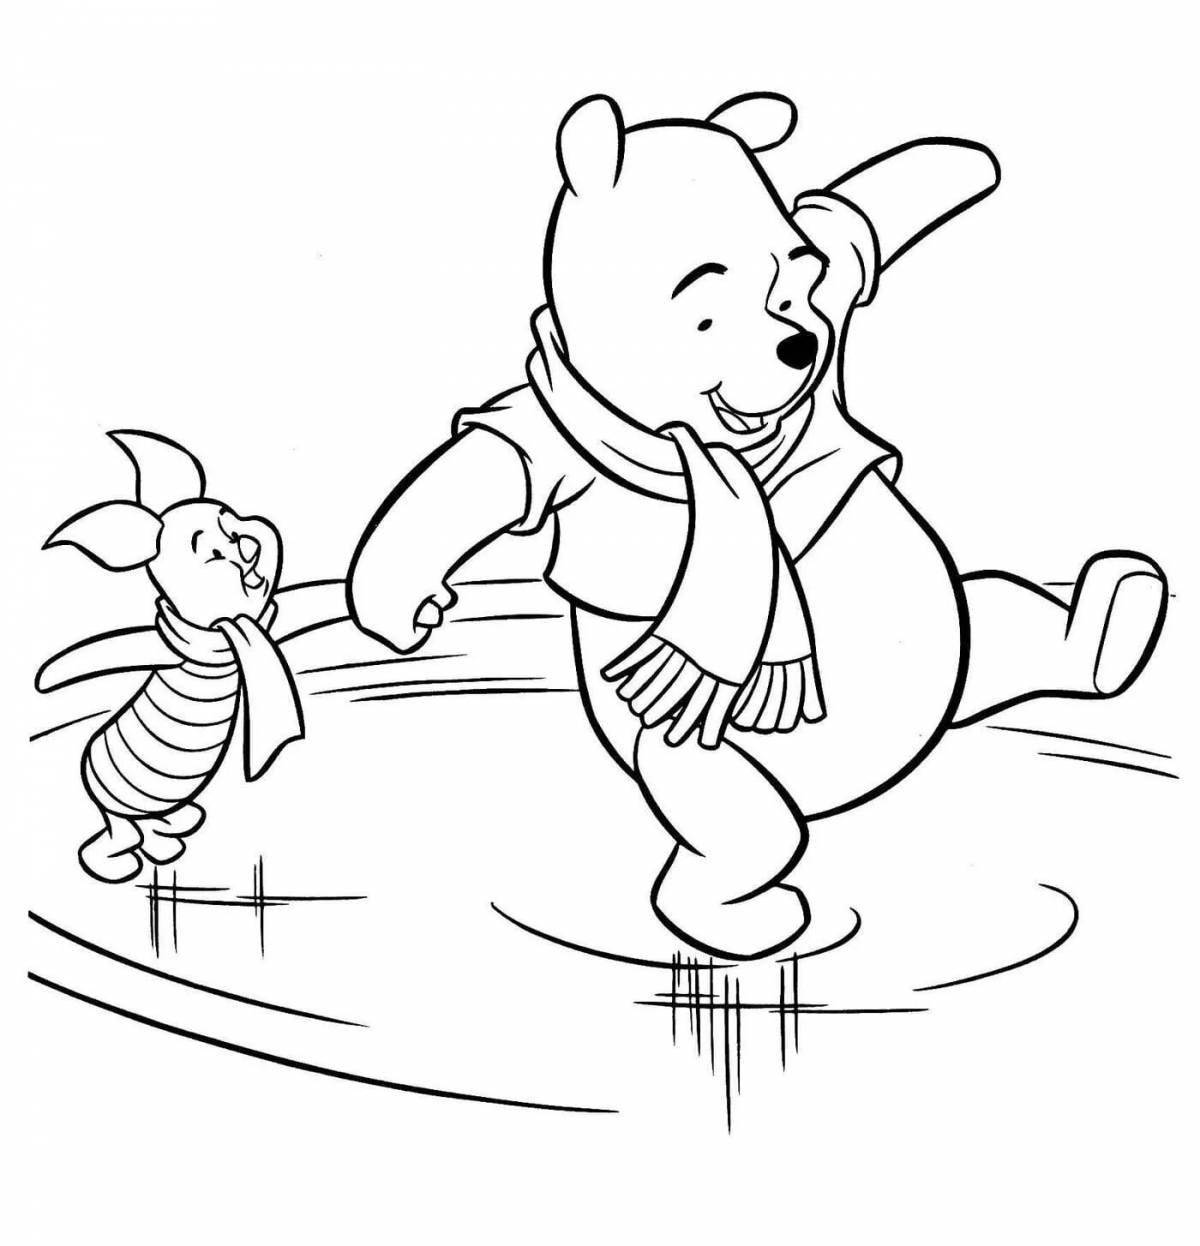 Great ice safe coloring page